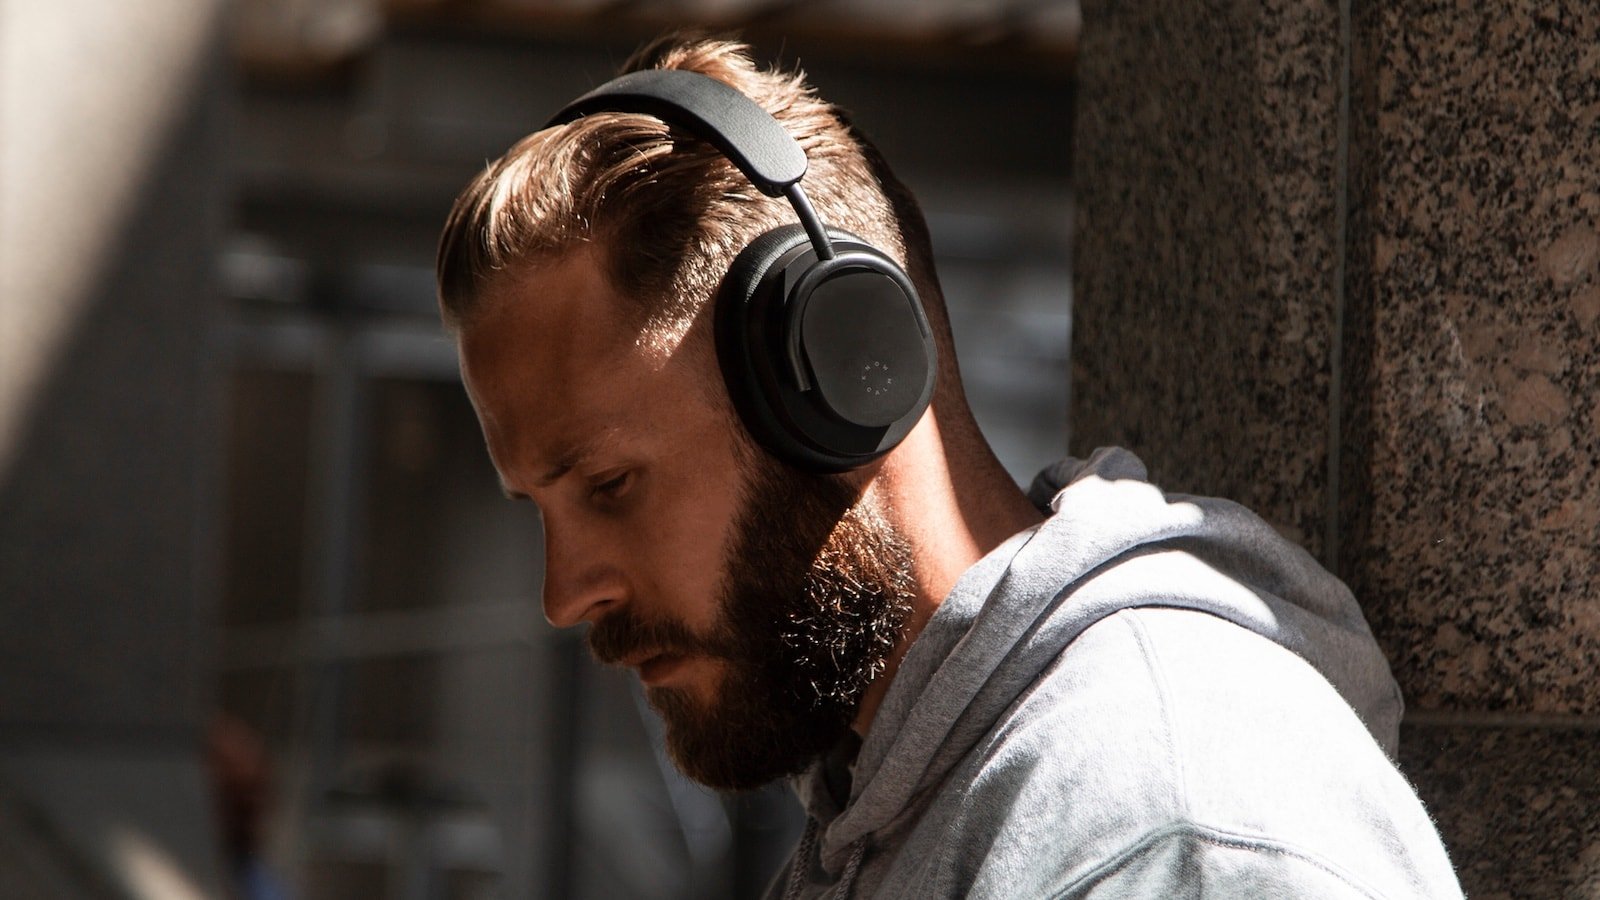 Know Calm Headphones have adjustable hush active noise cancellation